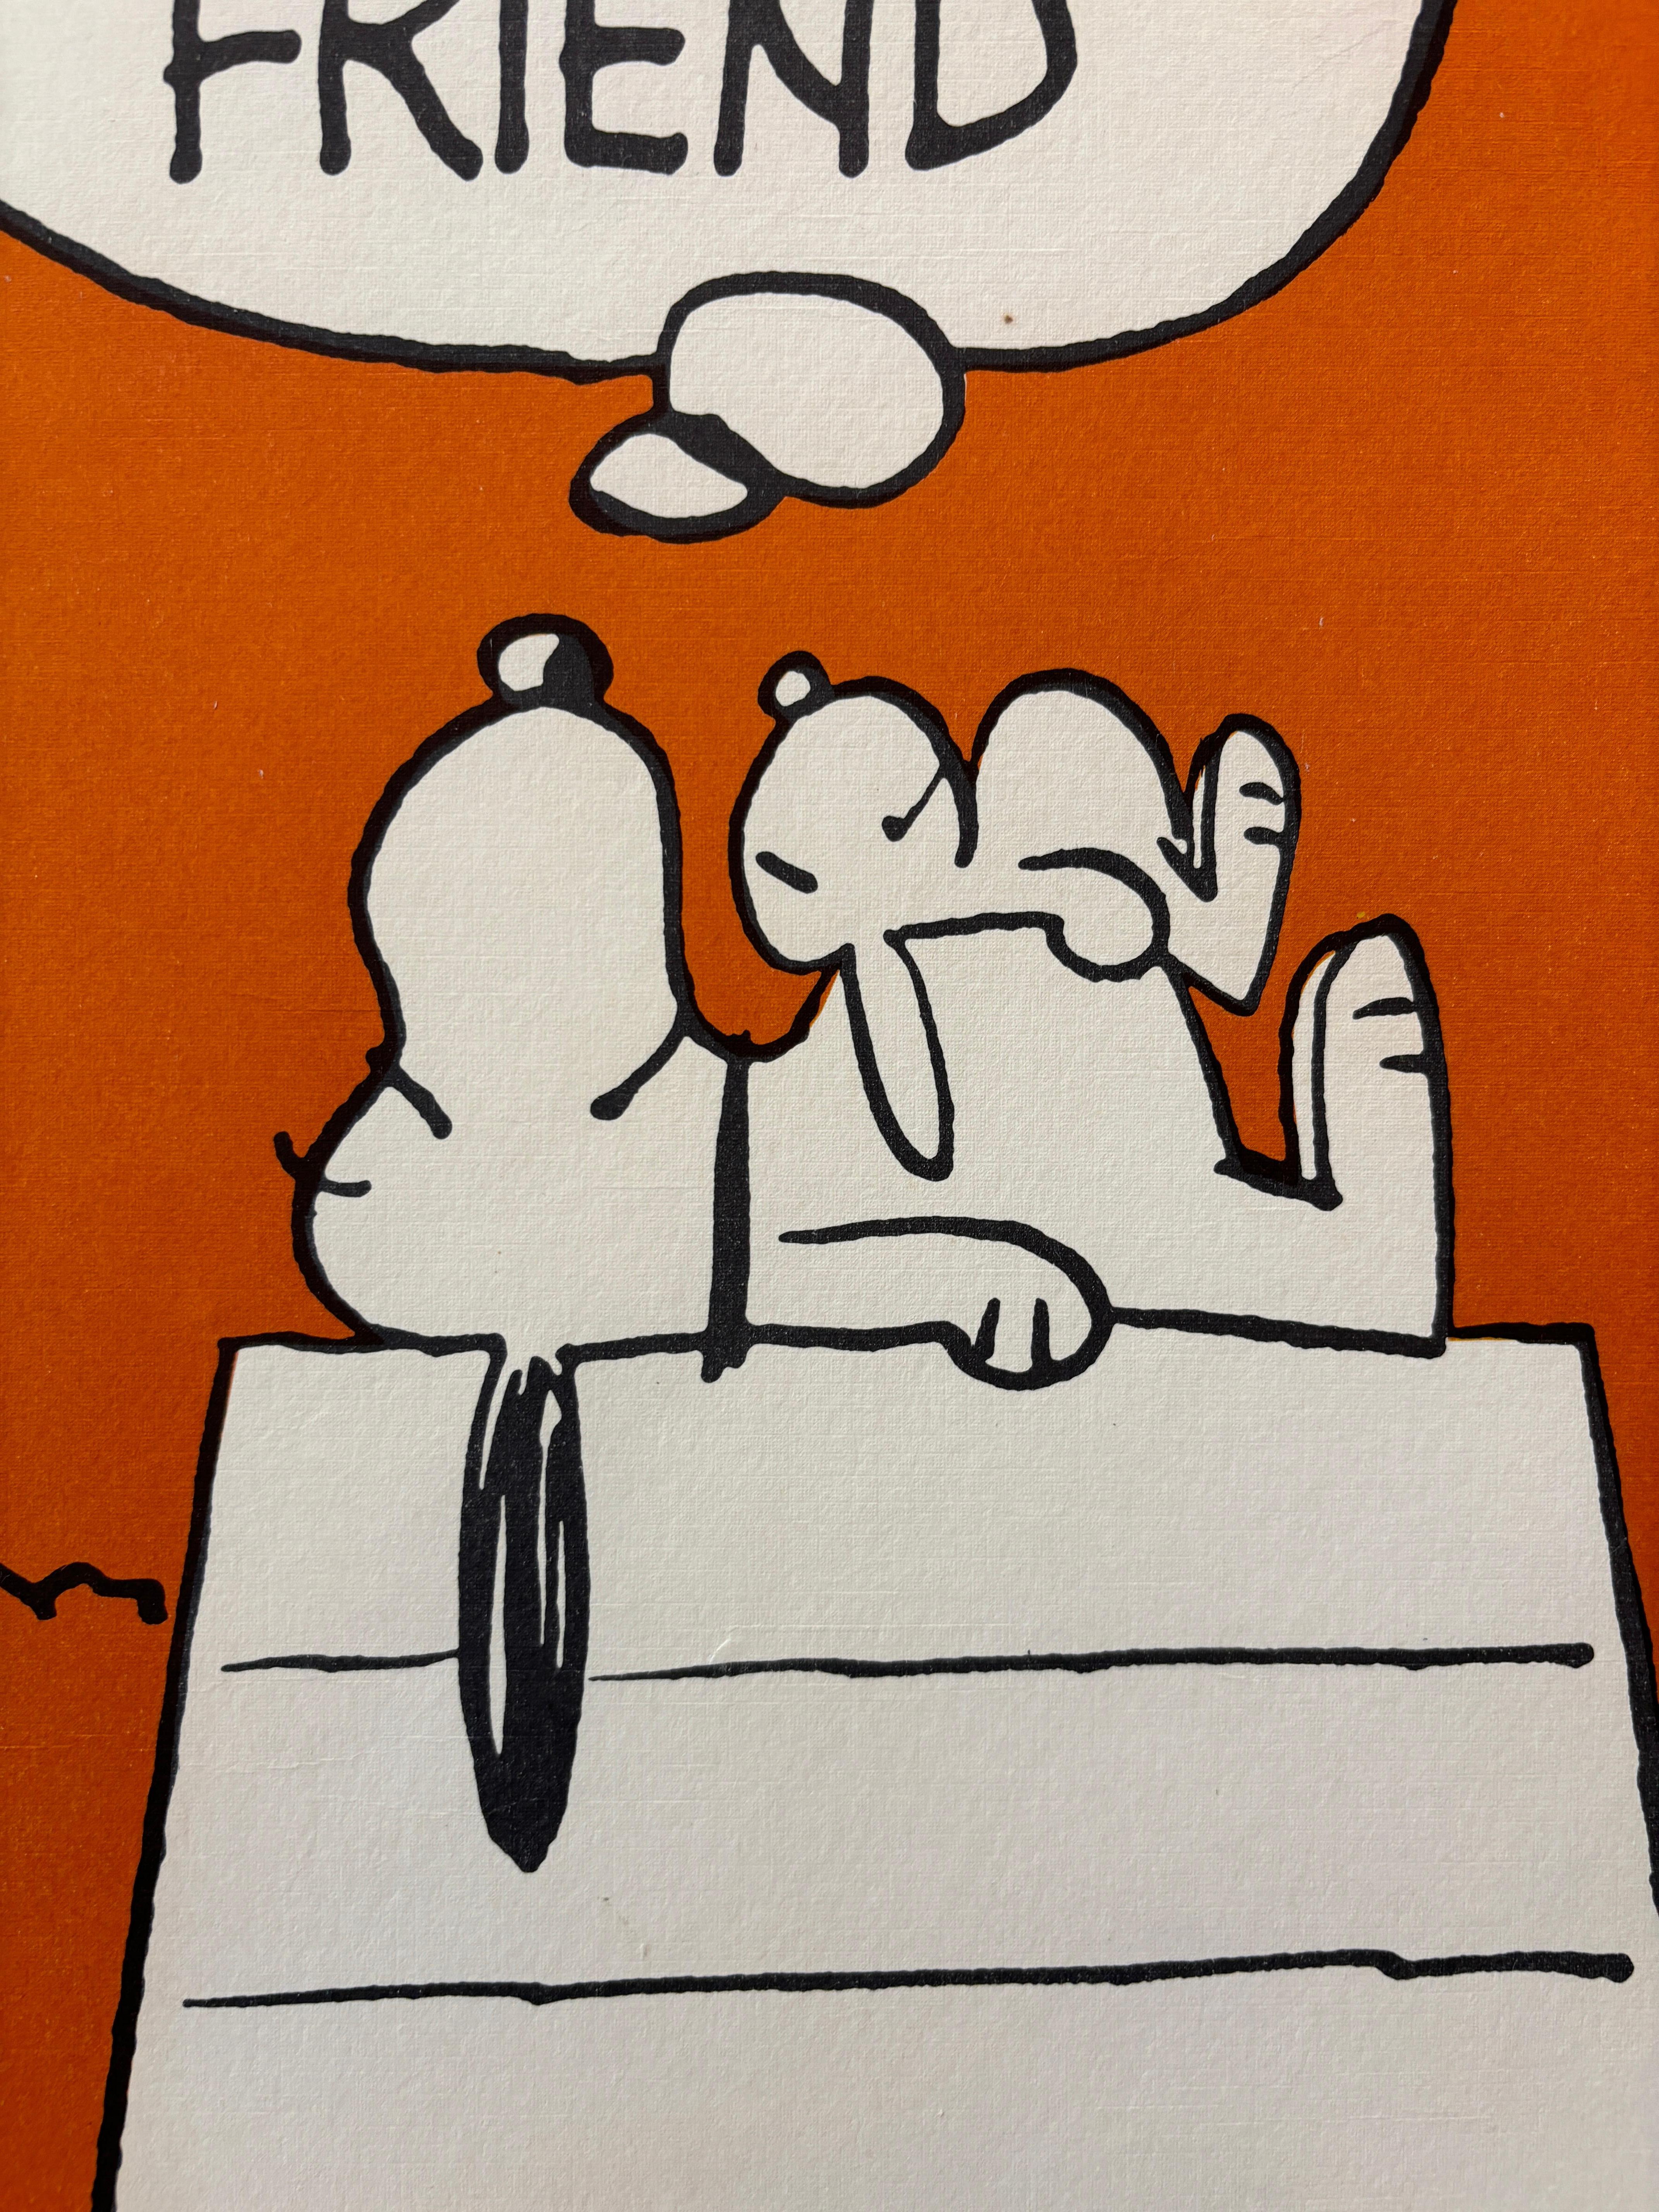 French Snoopy Original Vintage Poster, 'It's Nice to Have a Friend', Circa 1958